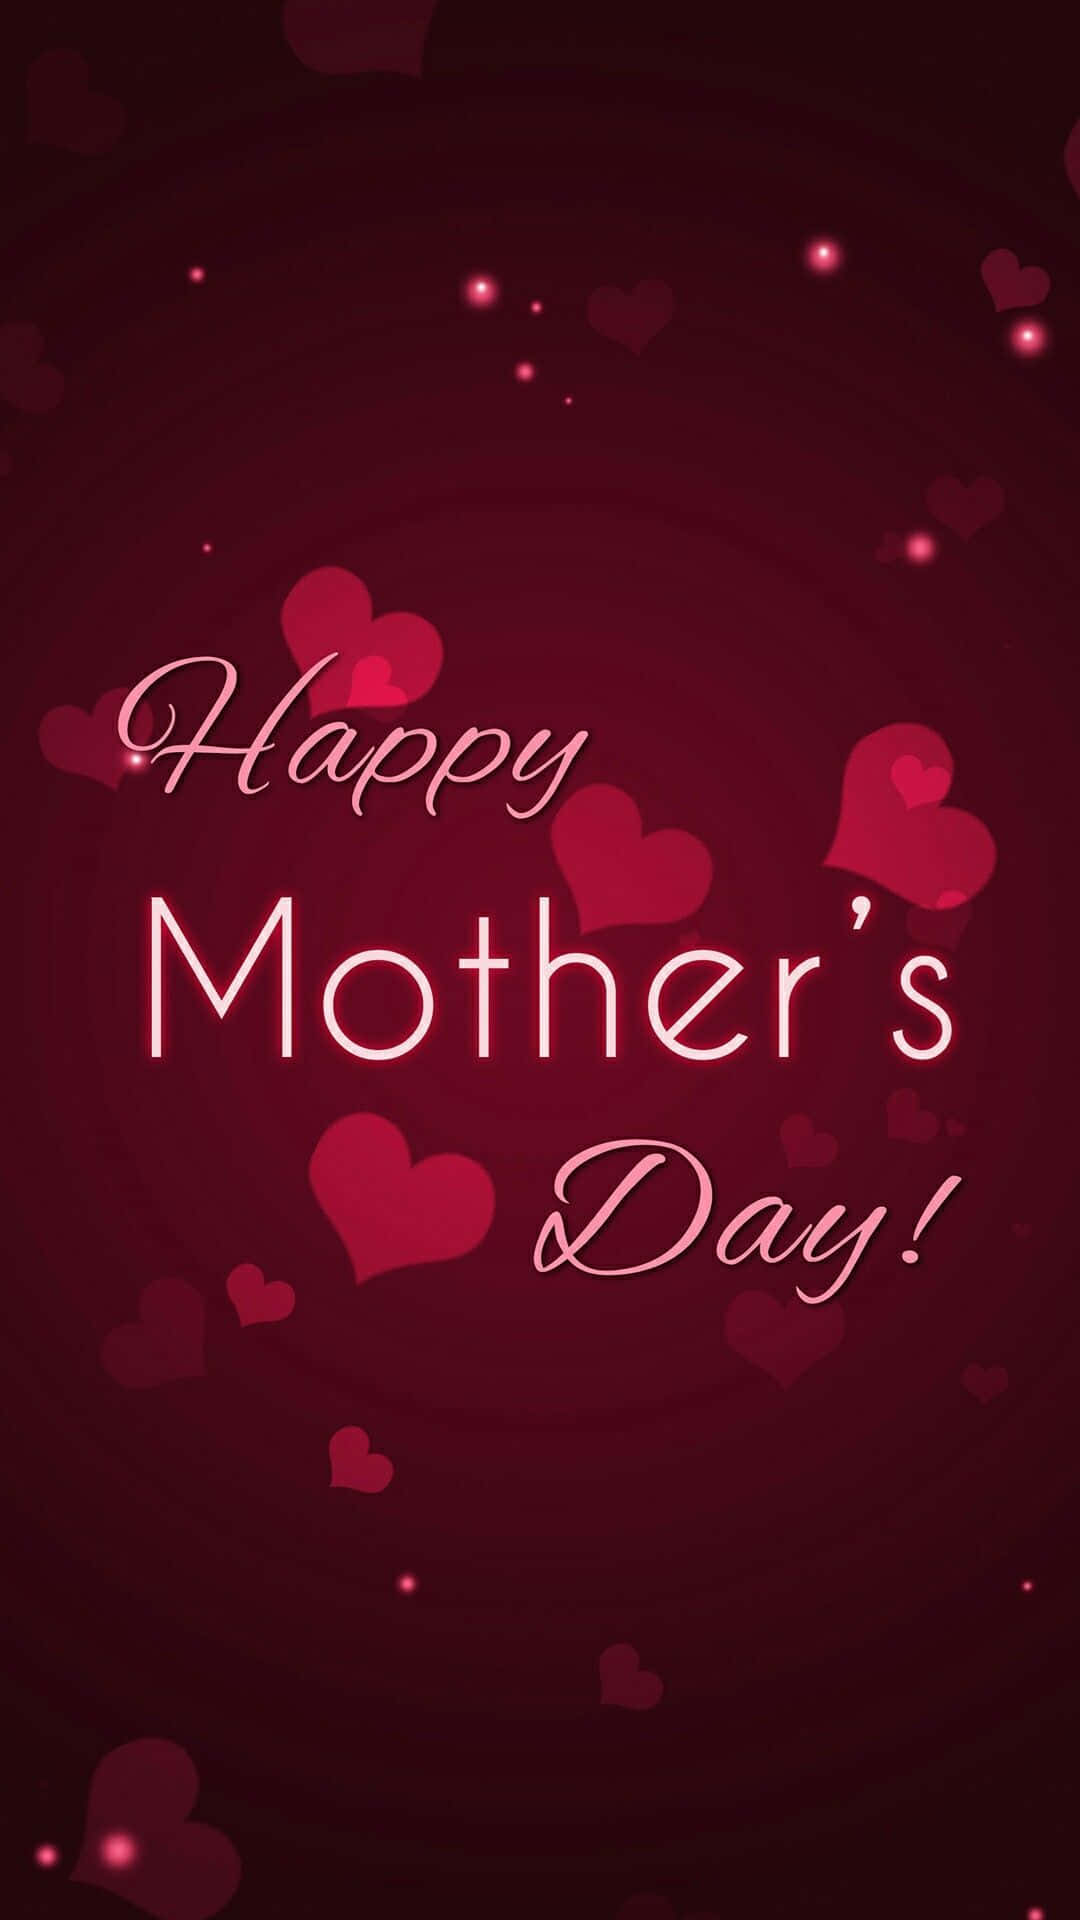 Download Happy Mother's Day Pictures 1080 x 1920 | Wallpapers.com